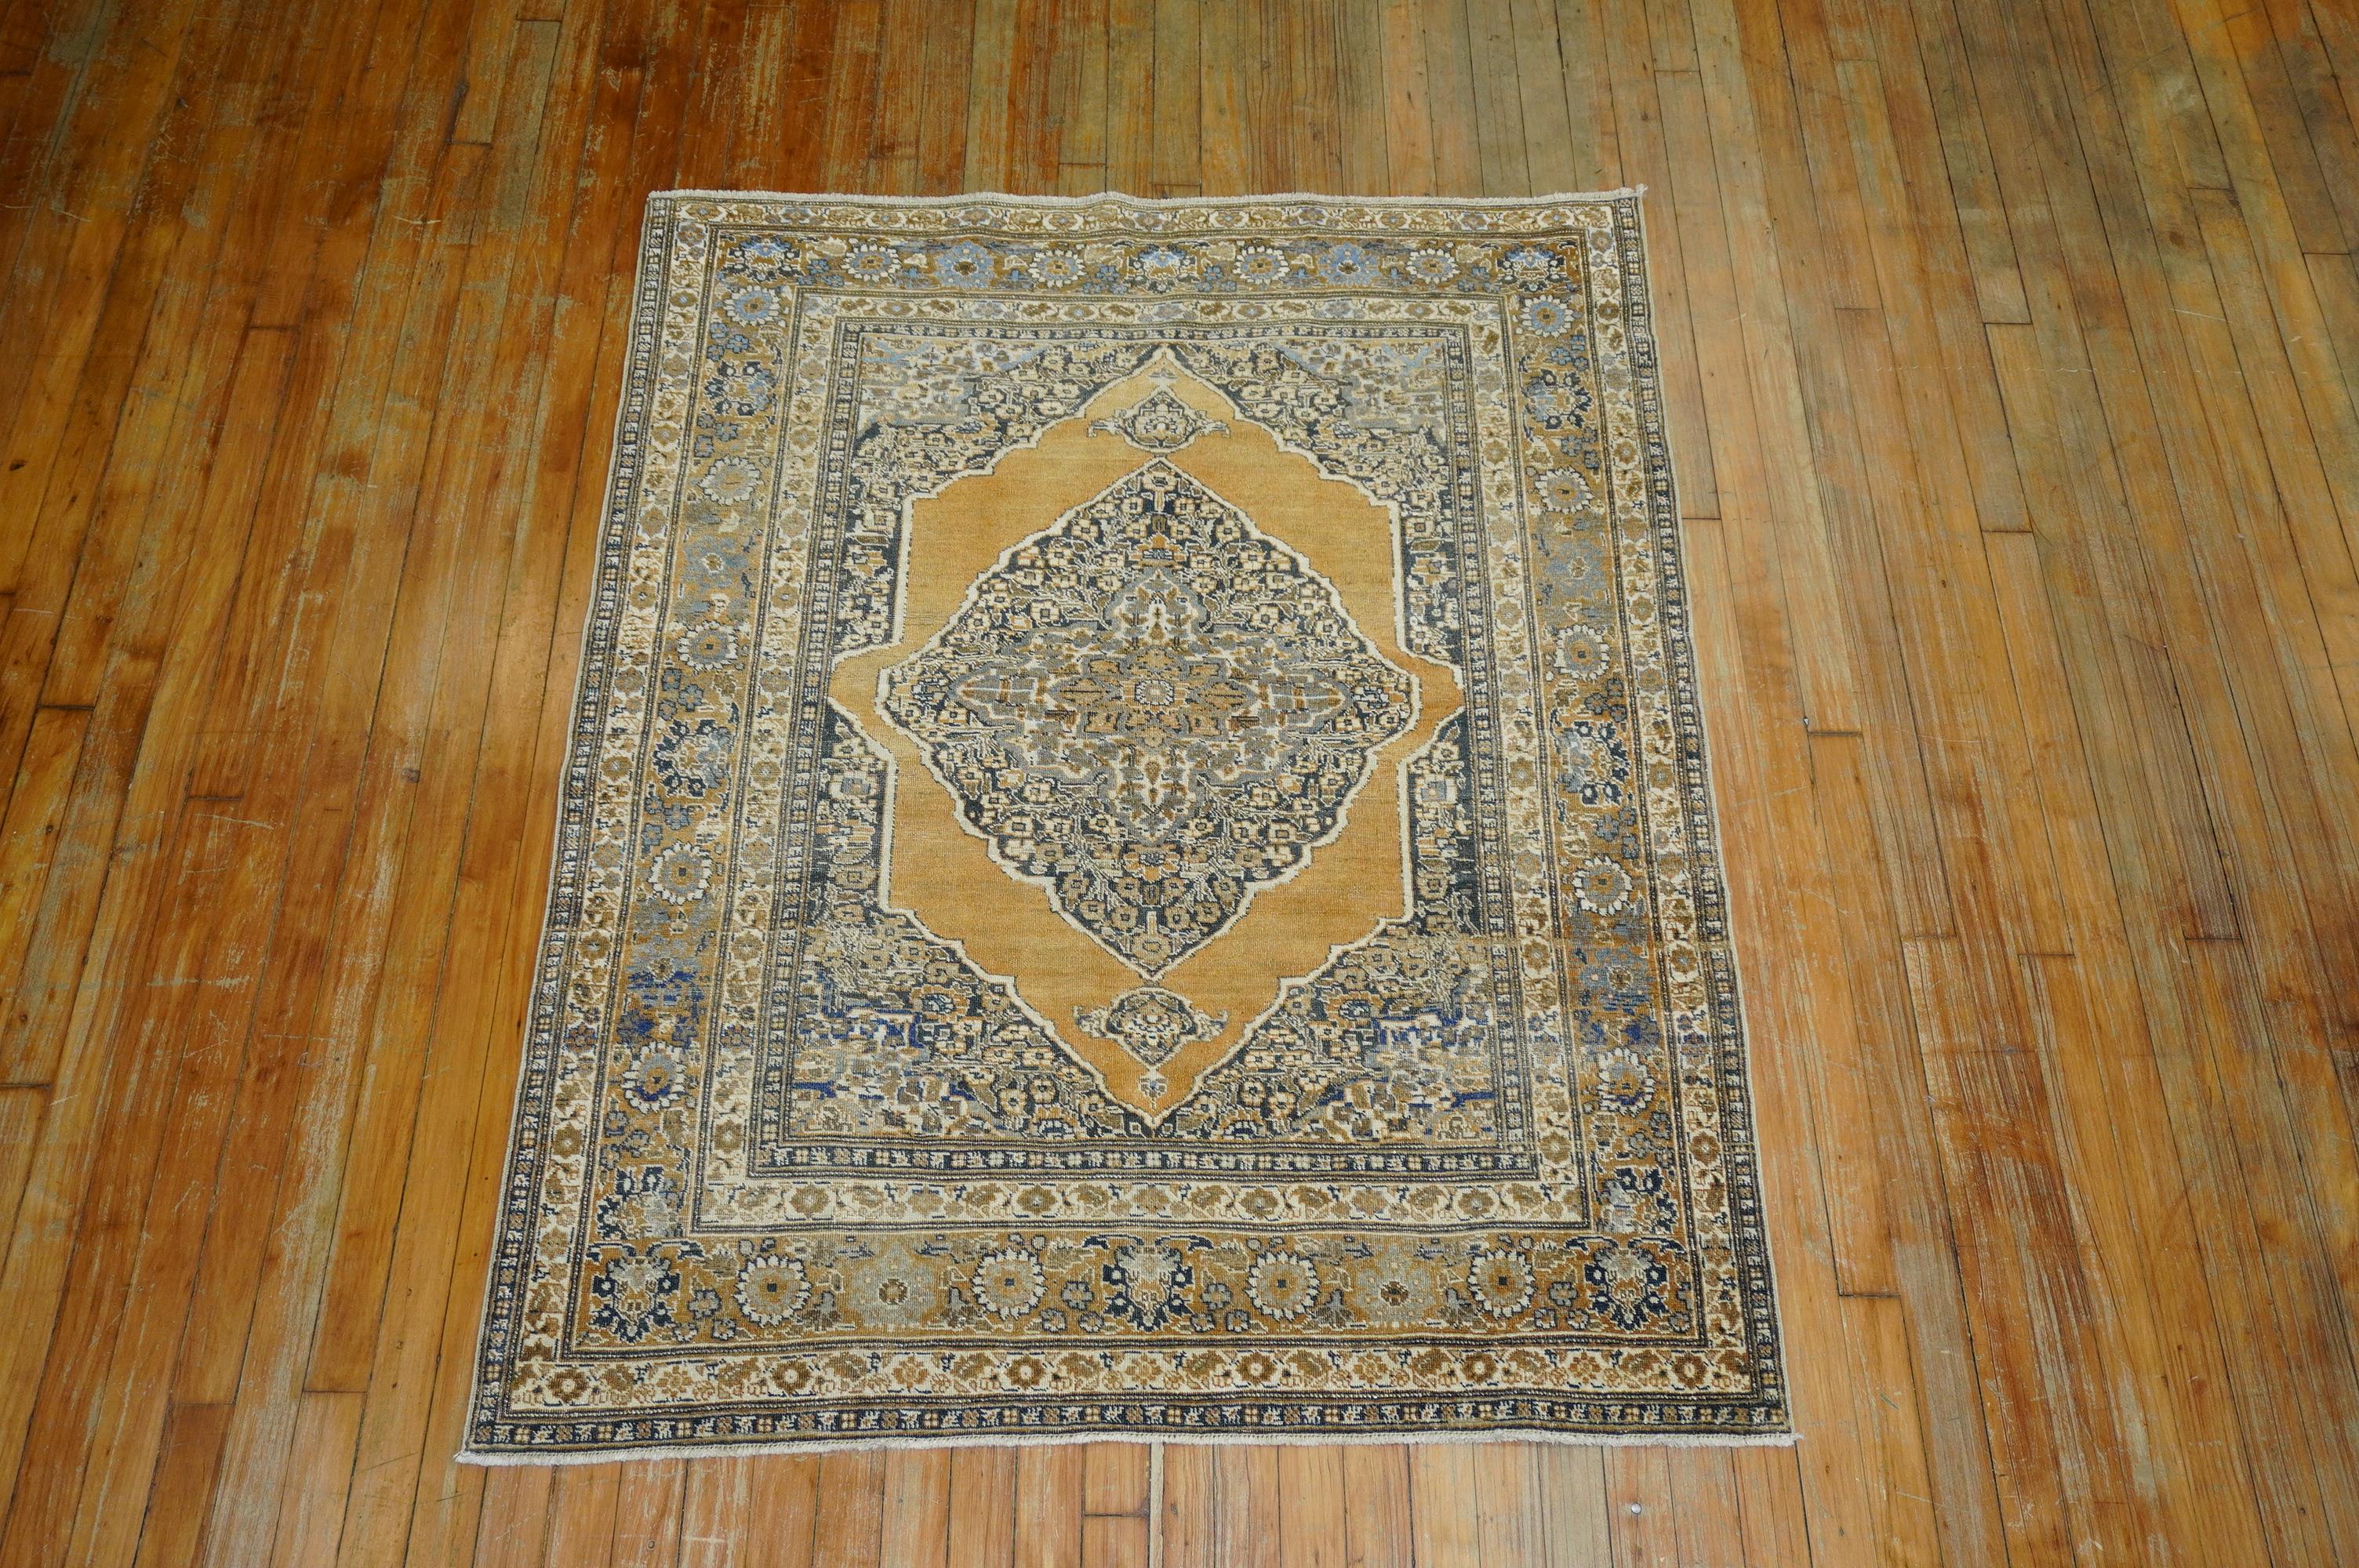 An early 20th century Persian gold charcoal color base Classic Medallion and Border Design Tabriz rug, circa 1910.

Measures: 3'11” x 5'.